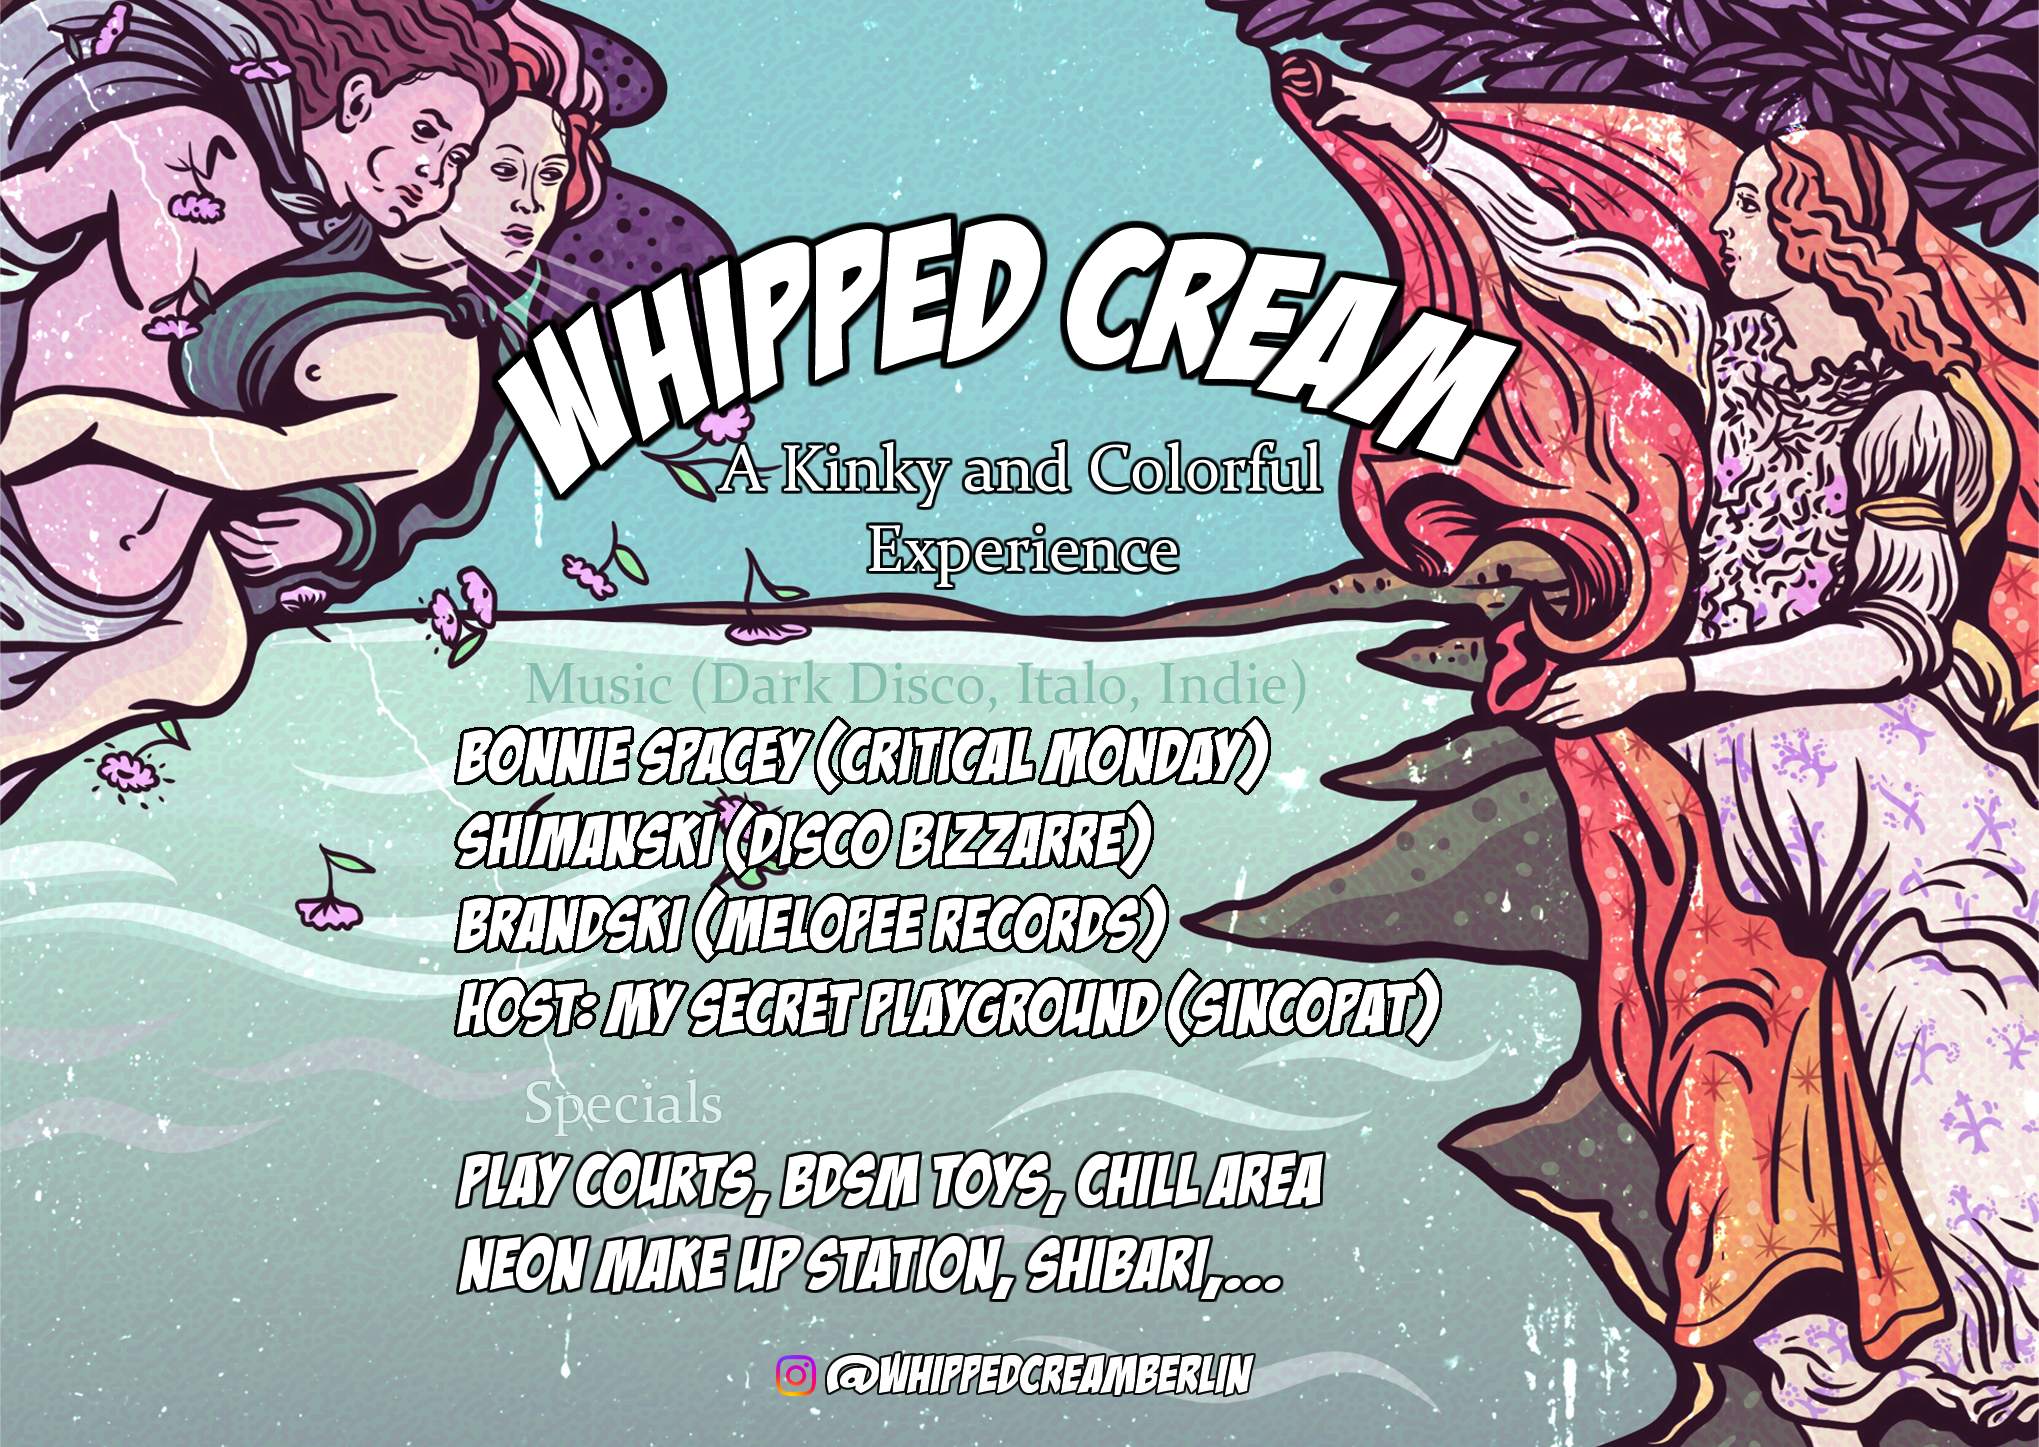 Whipped Cream - A Kinky and Colorful Experience - フライヤー裏